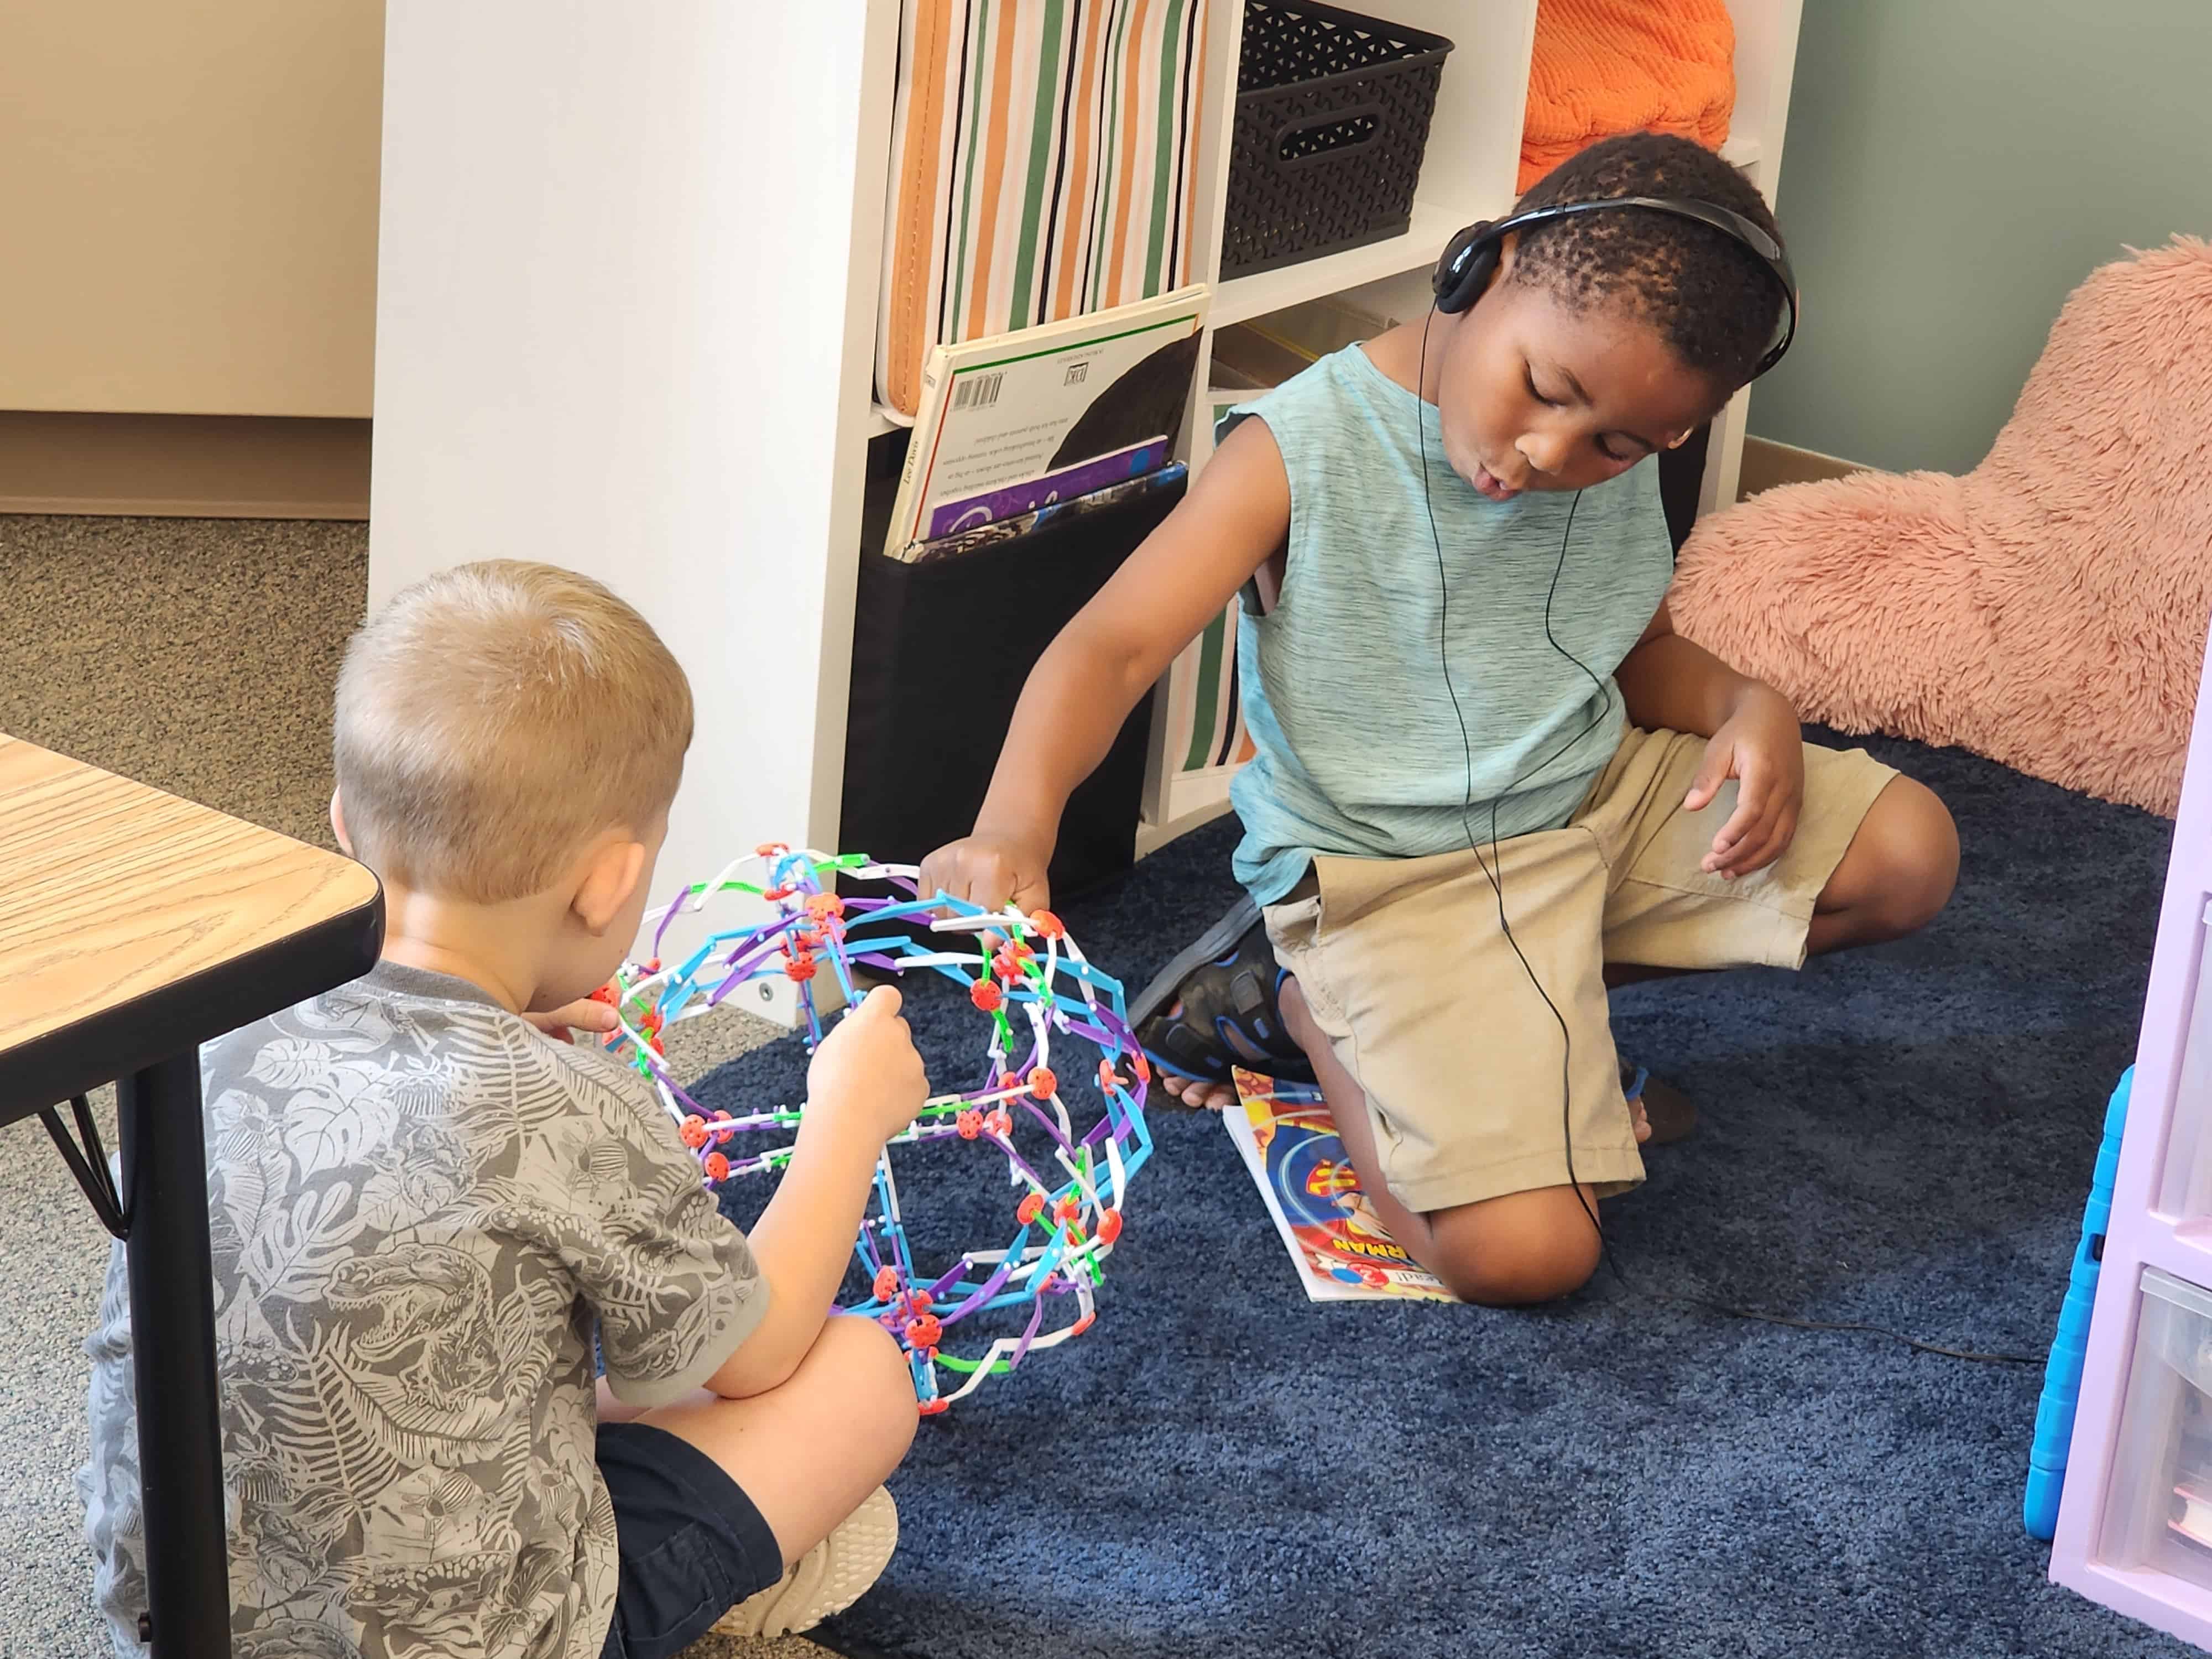 Two students play with a flexible sphere in a classroom setting at Kinder Camp.